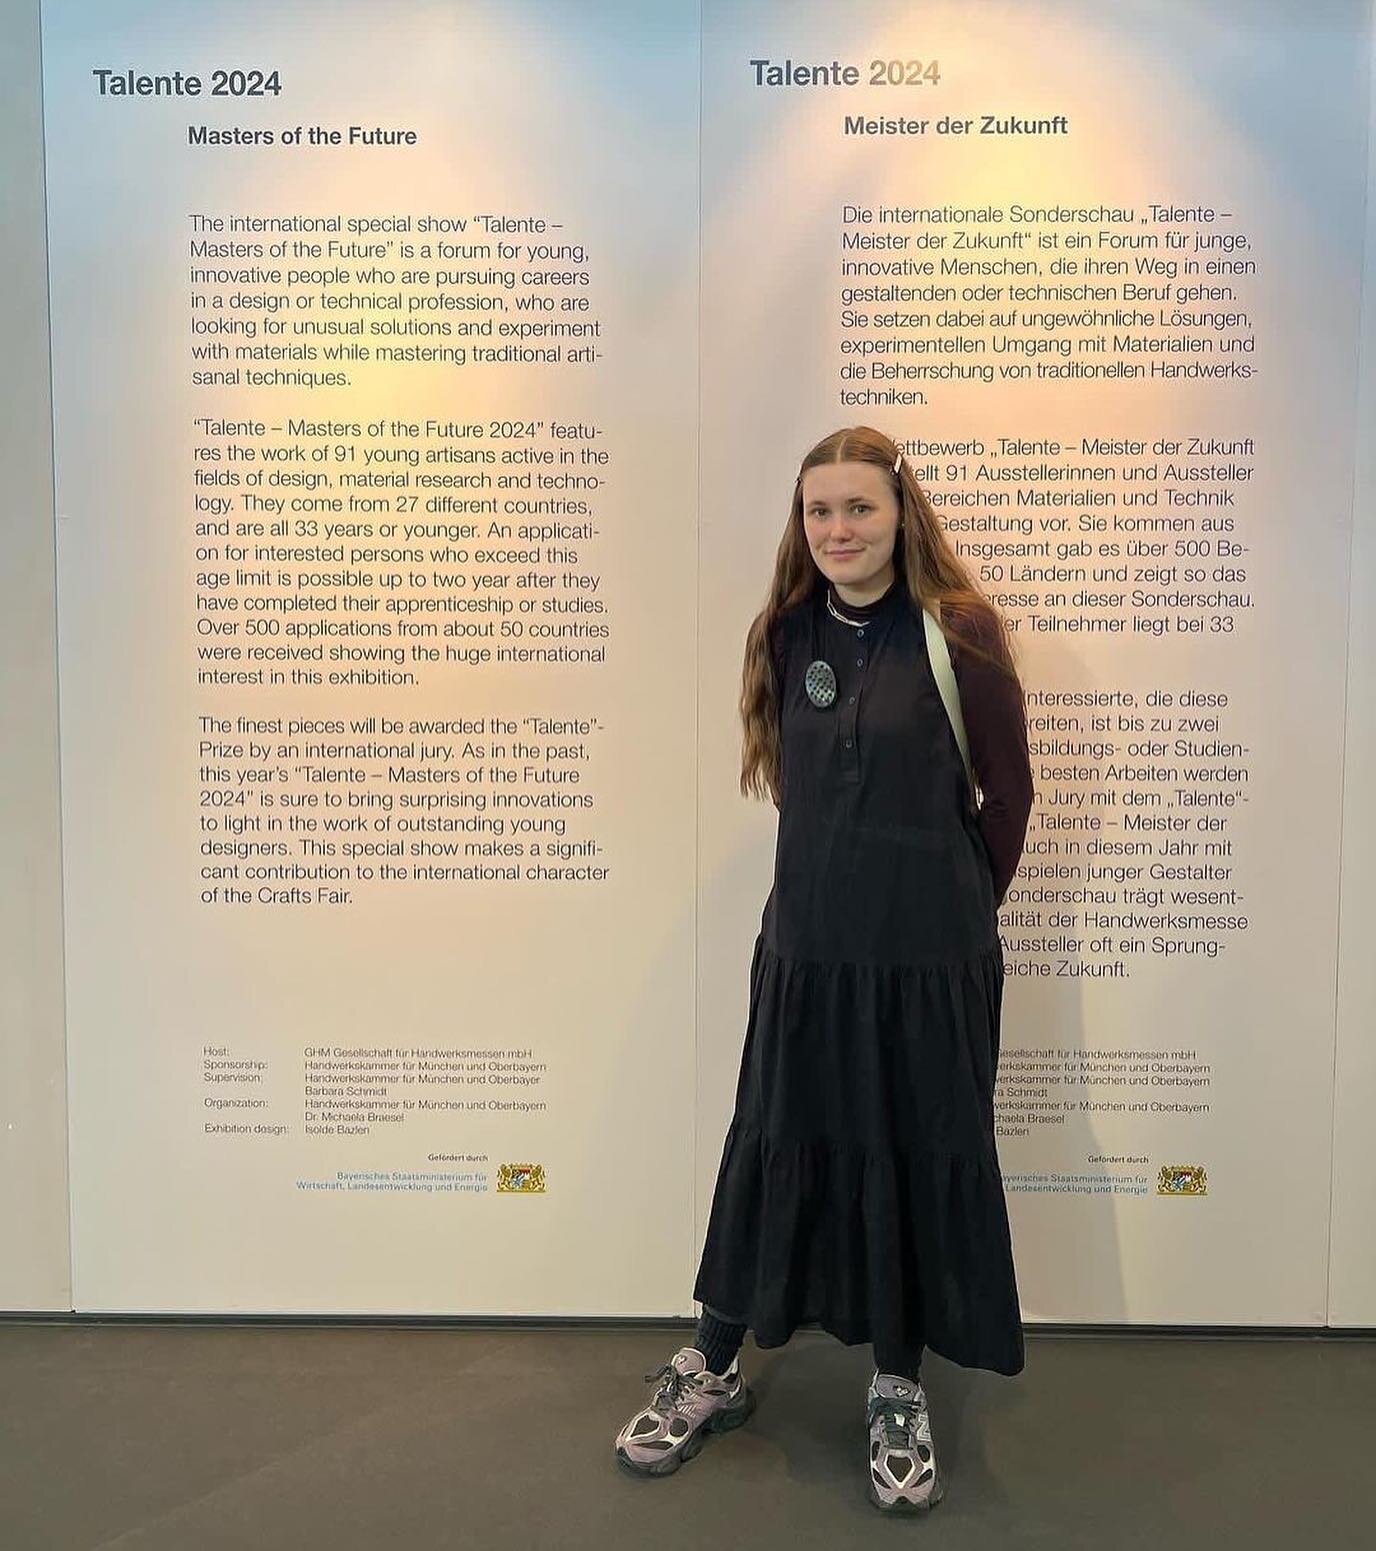 Congratulations to BA (Fine Art) (Honours) graduate Beth Sanderson on being selected for TALENTE -Masters of the Future 2024 in Munich, Germany. 

TALENTE was founded in 1980 as an international competition for all areas of craft and design. 

@beth_